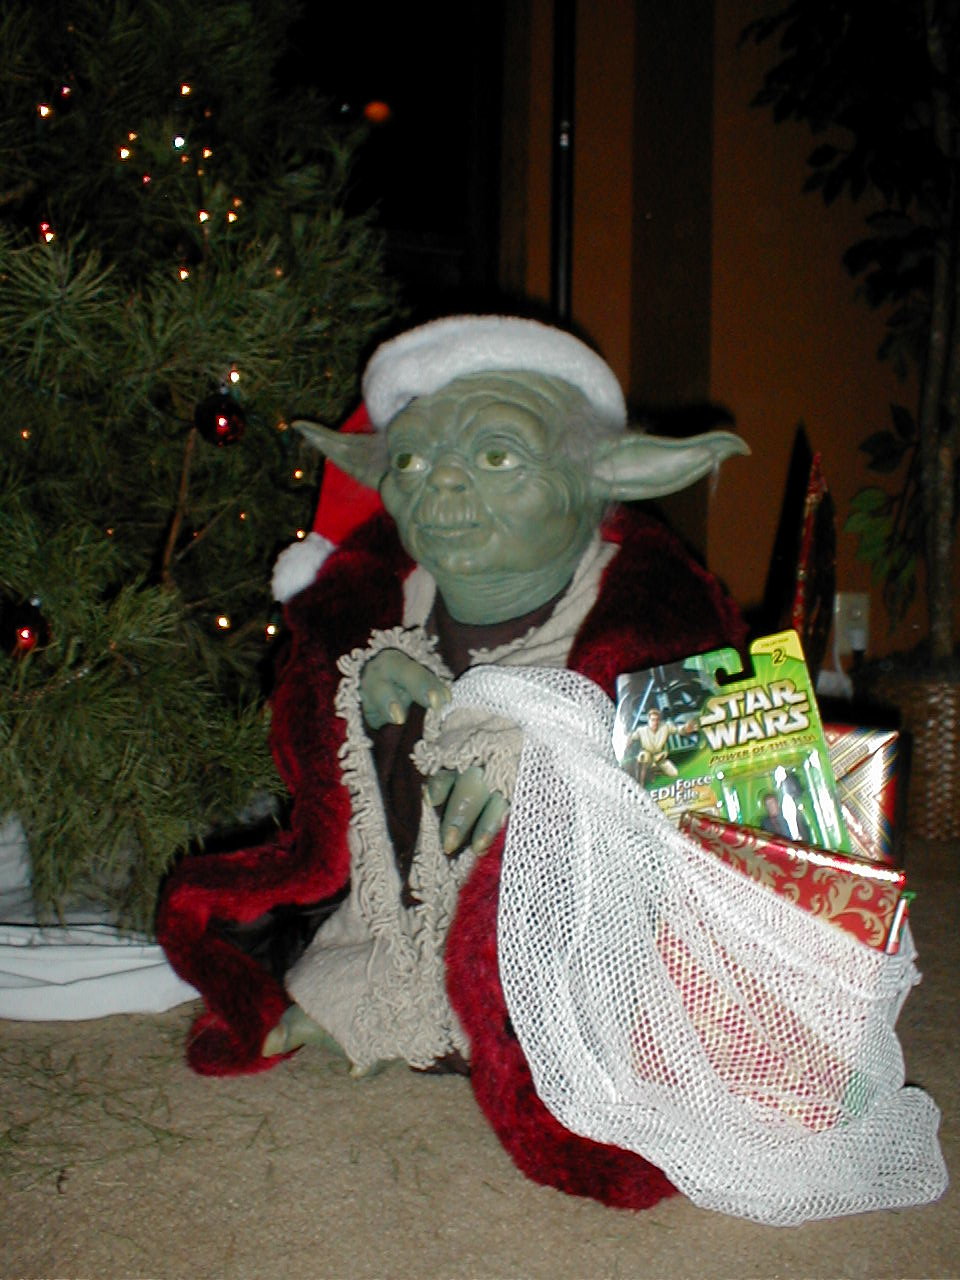 Lifesize Santa Yoda replica with a bag full of gifts